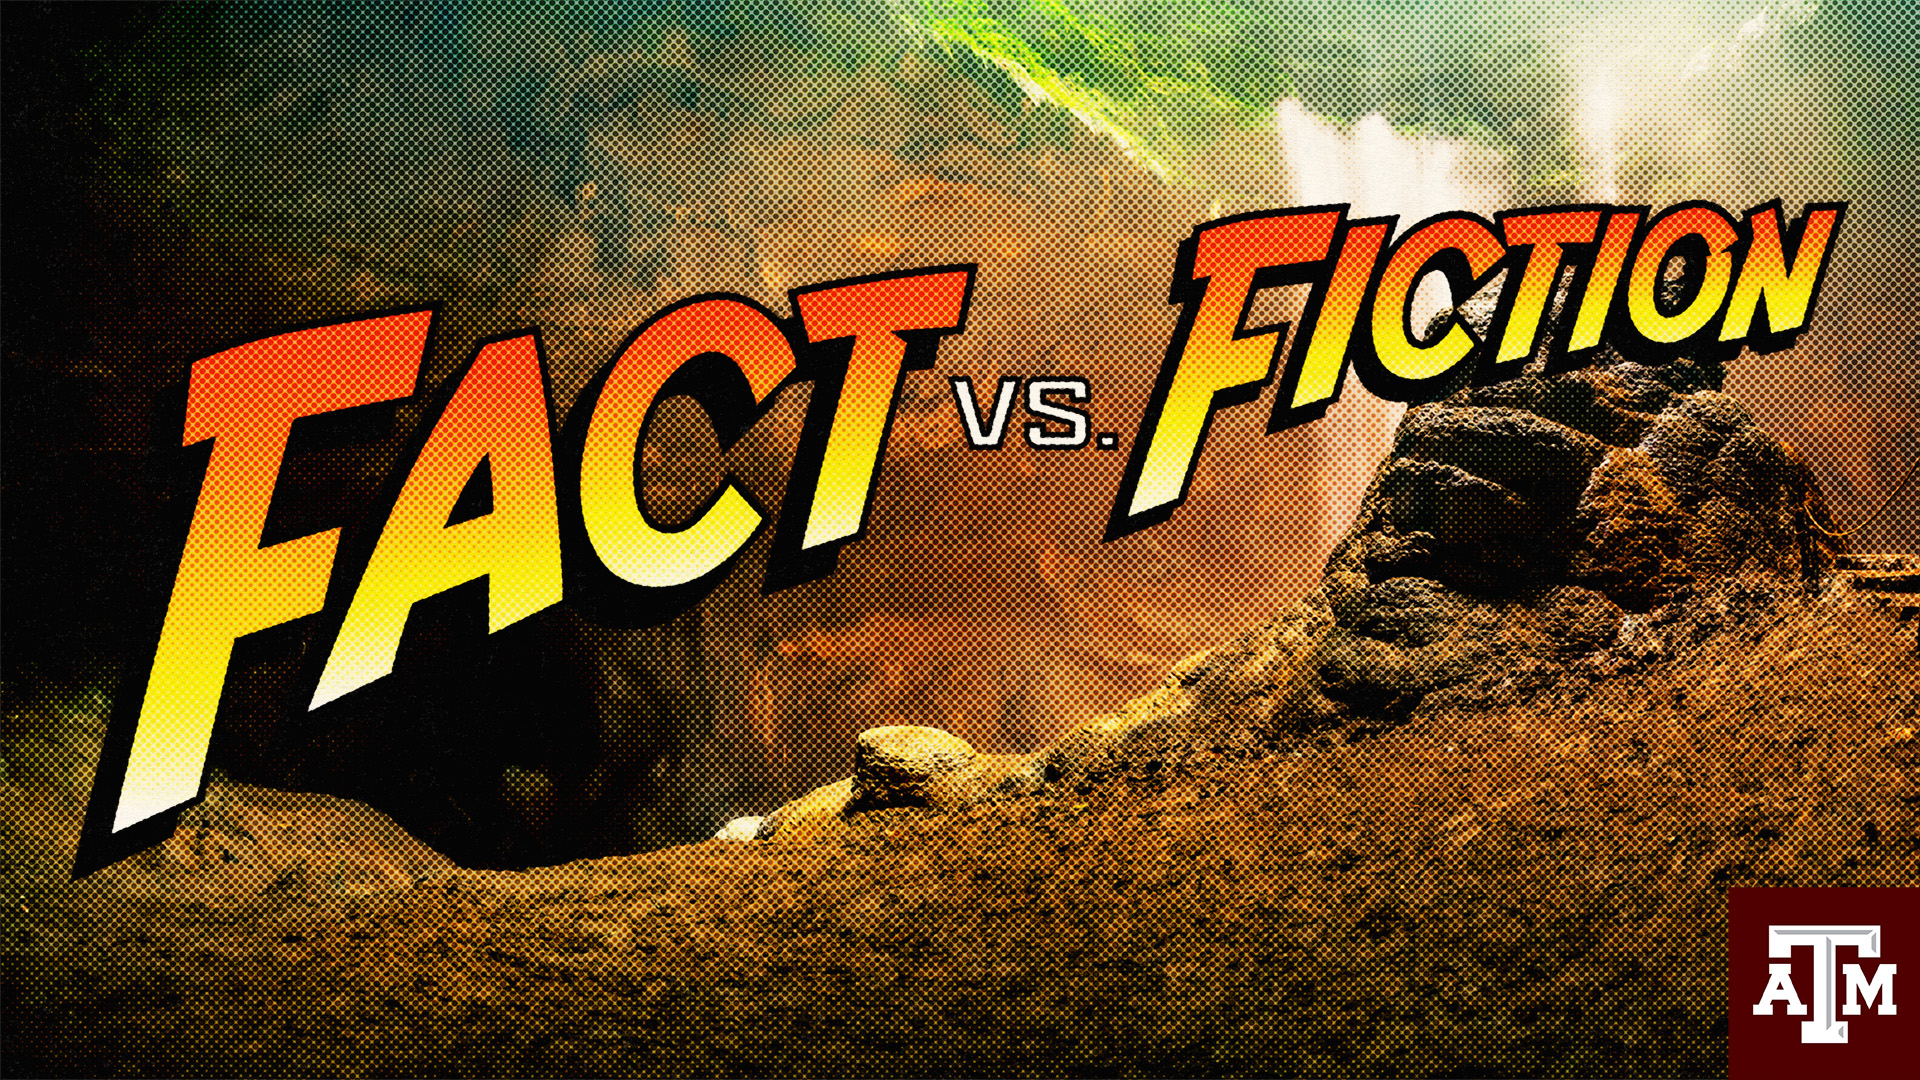 Graphic featuring a generic jungle background along with the words "Fact Vs. Fiction" in an orange-yellow gradient and the Texas A&M University logo in maroon and white